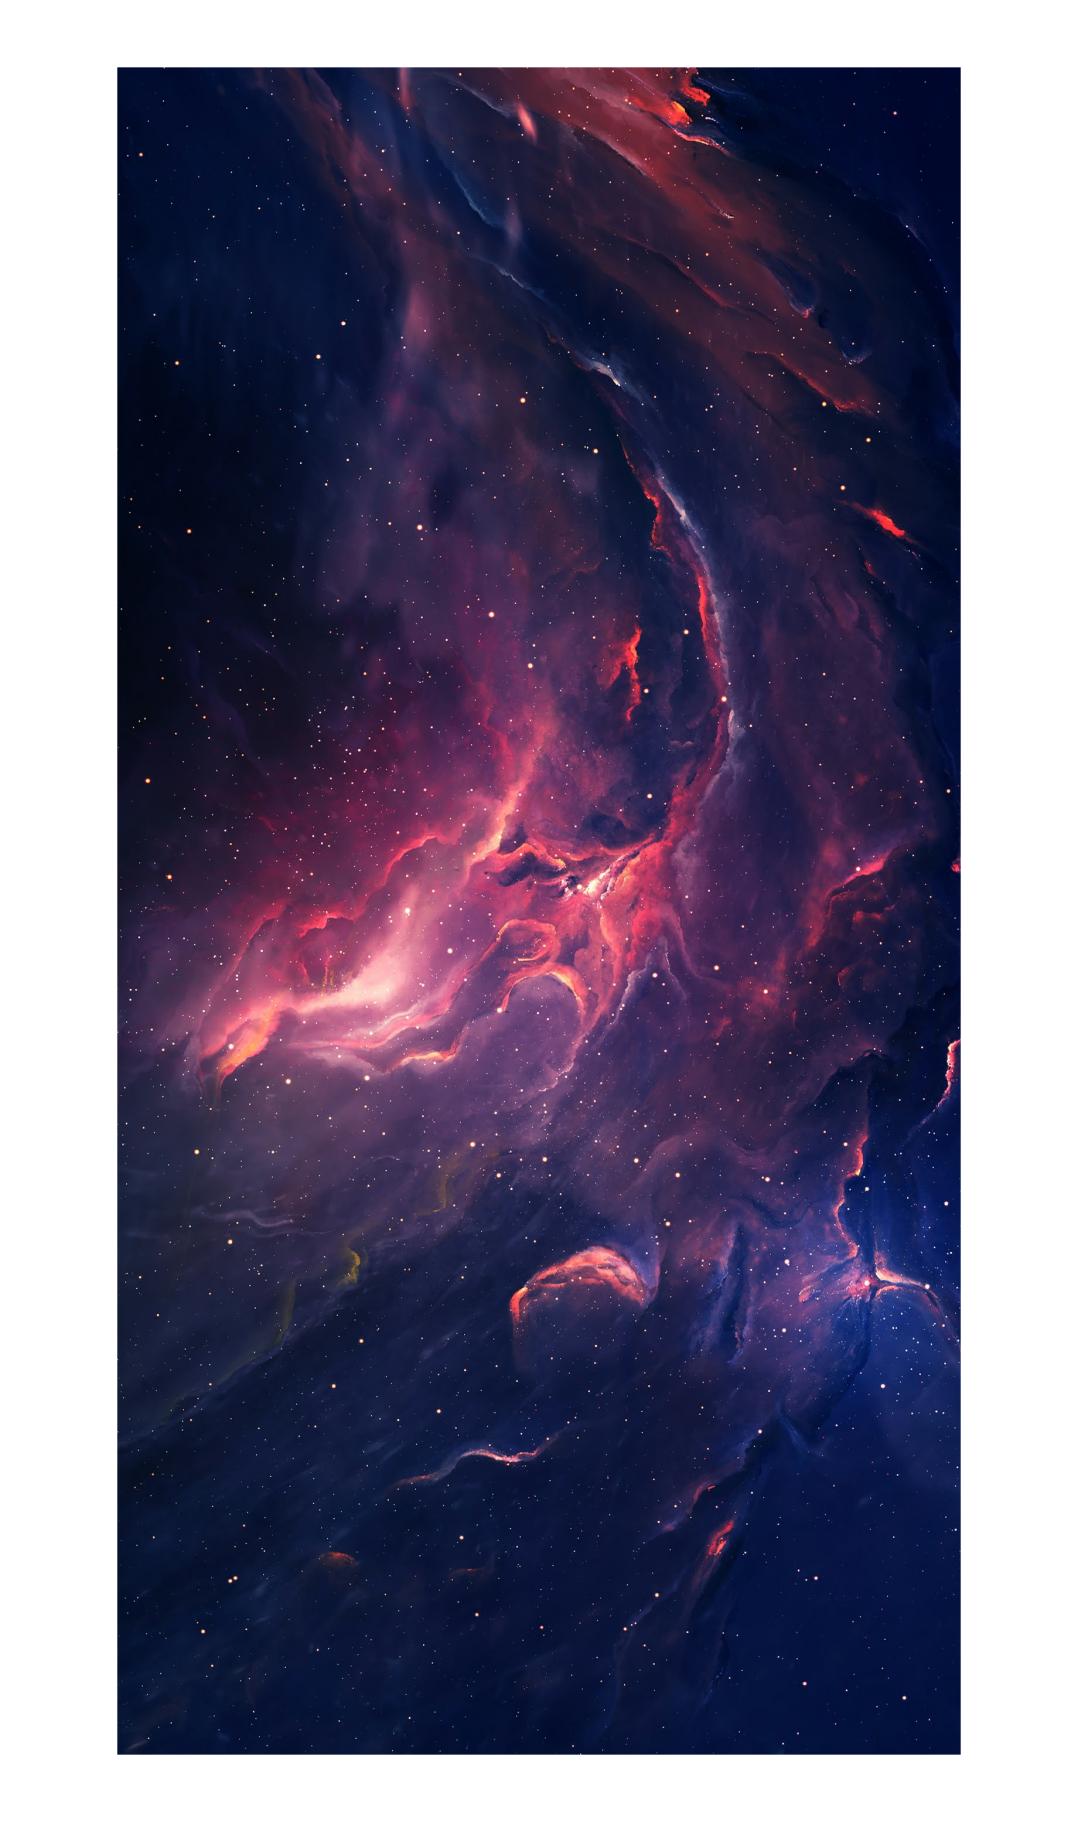 Wallpaper 18 9 For Android Apk Download